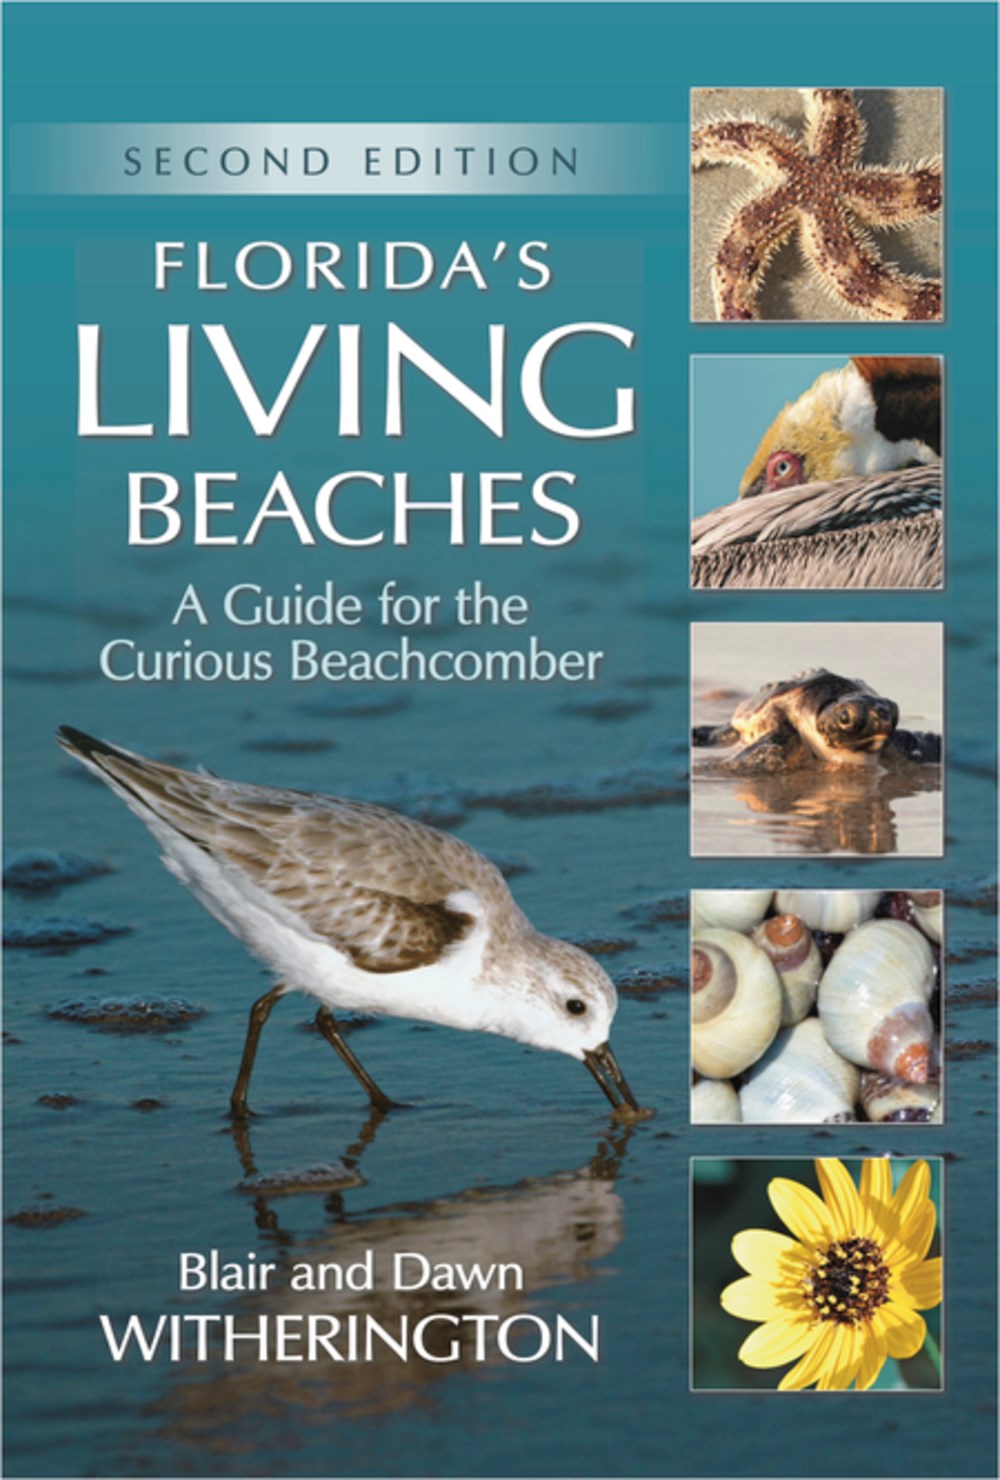 Florida's Living Beaches: A Guide for the Curious Beachcomber (2nd Edition)